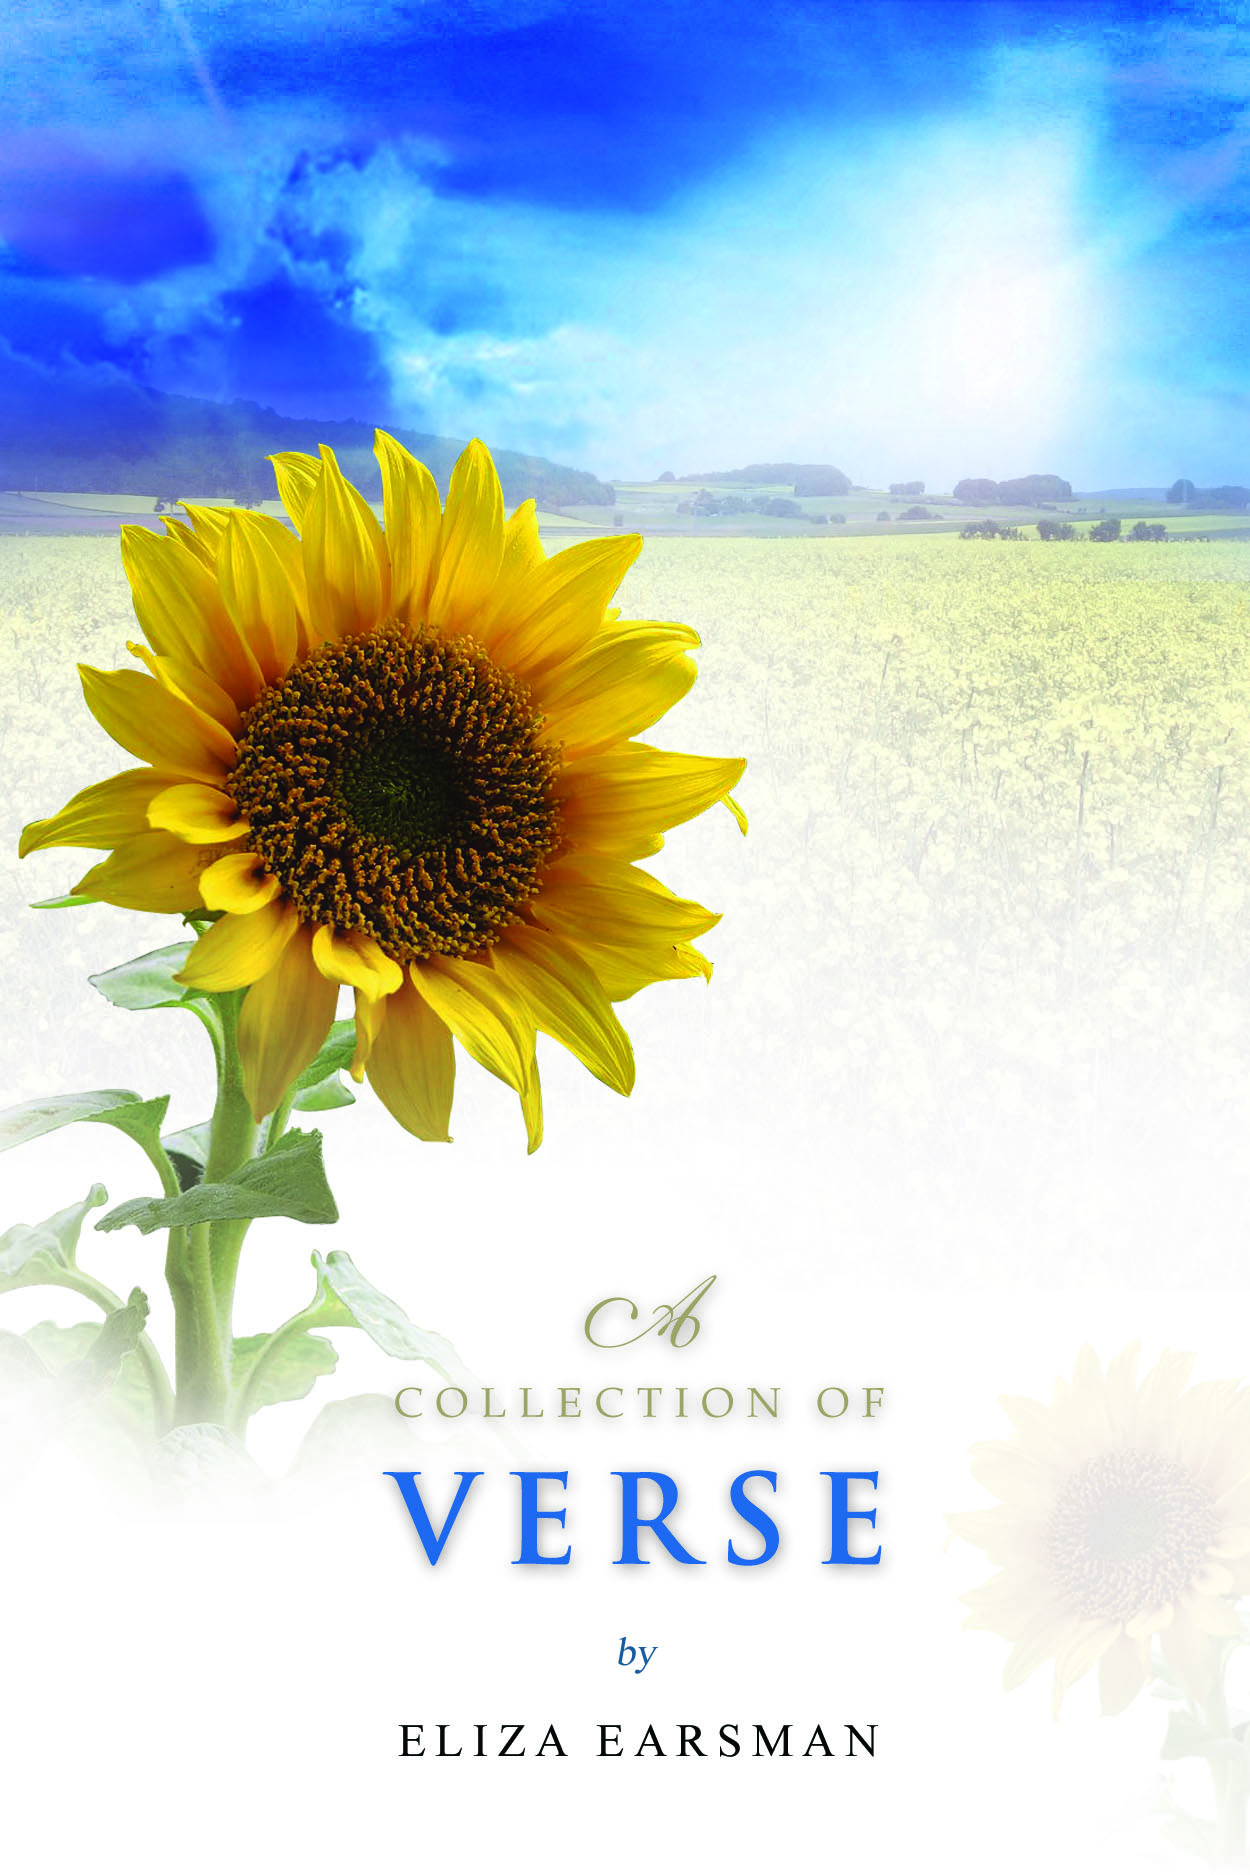 A COLLECTION OF VERSE - nonfiction 108 pages.